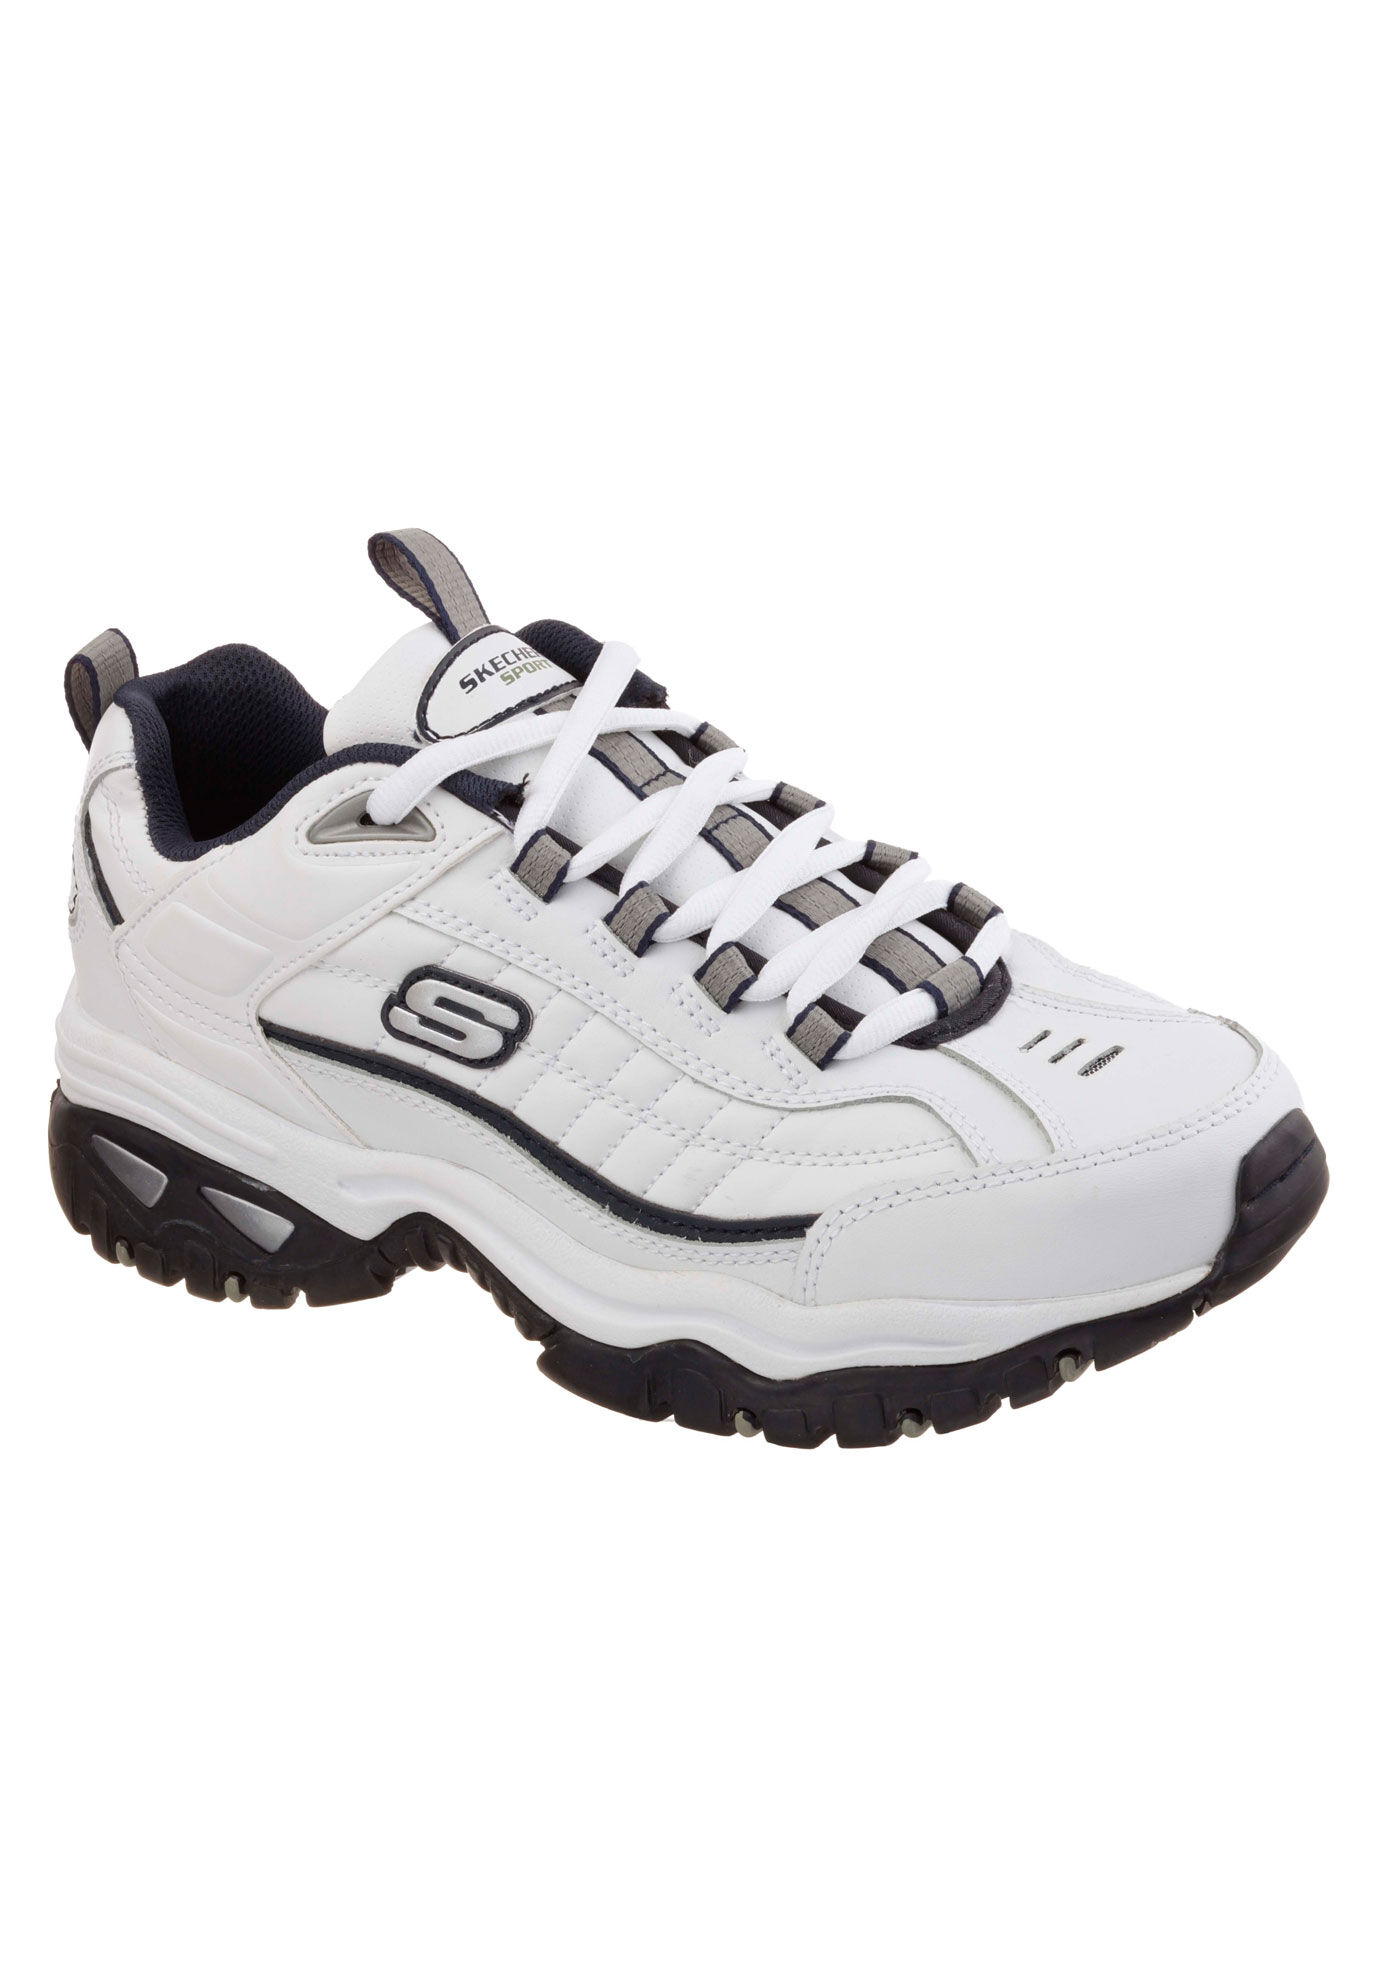 skechers wide fit shoes size 15 Sale,up 